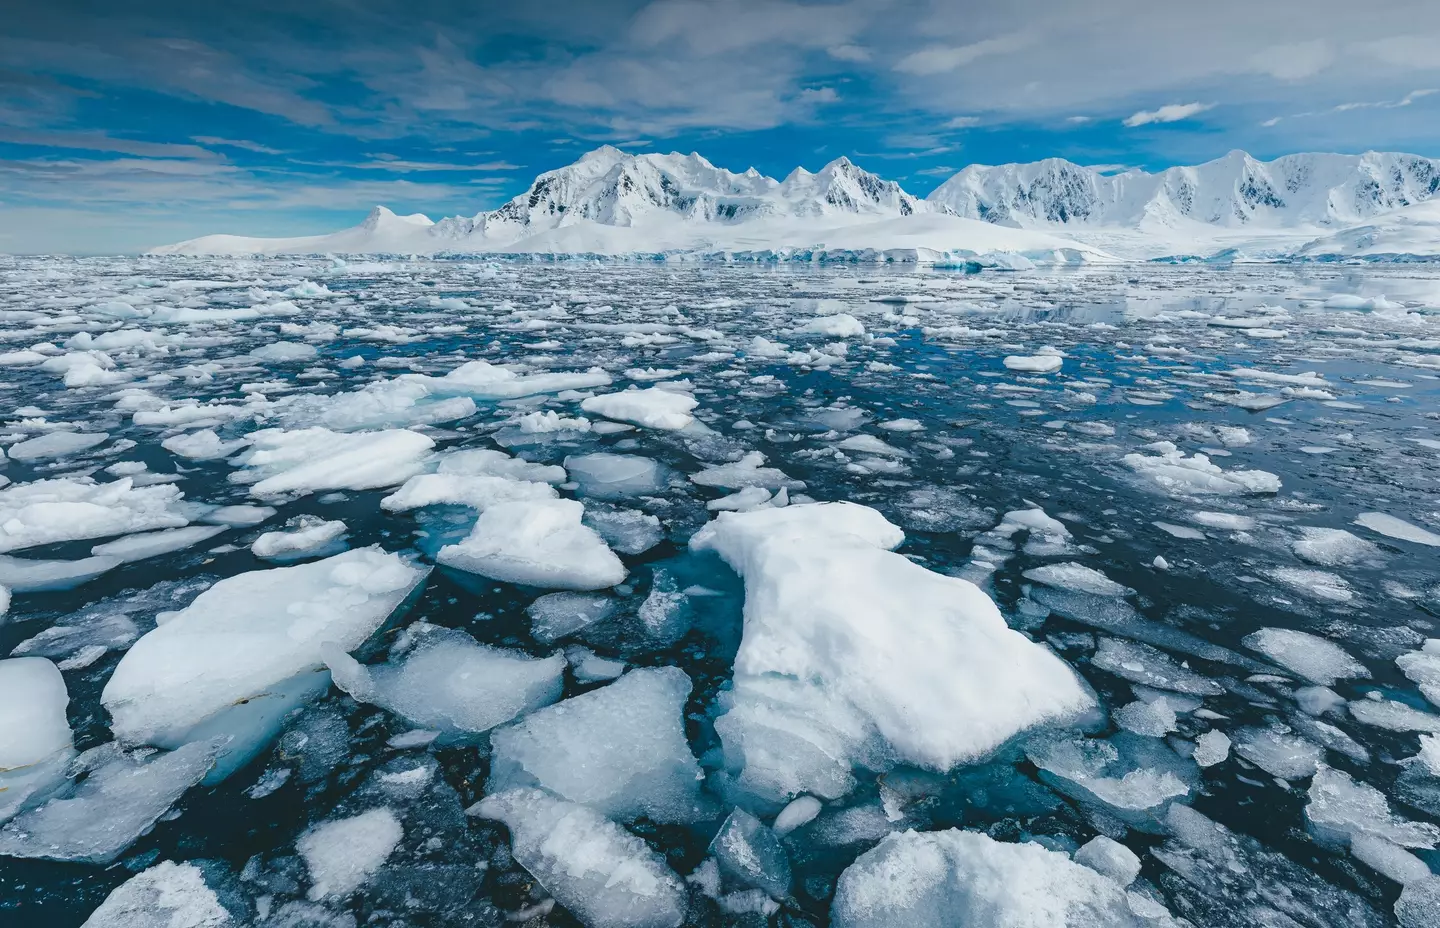 Scientists thing climate change is responsible for Antarctica's melting ice.